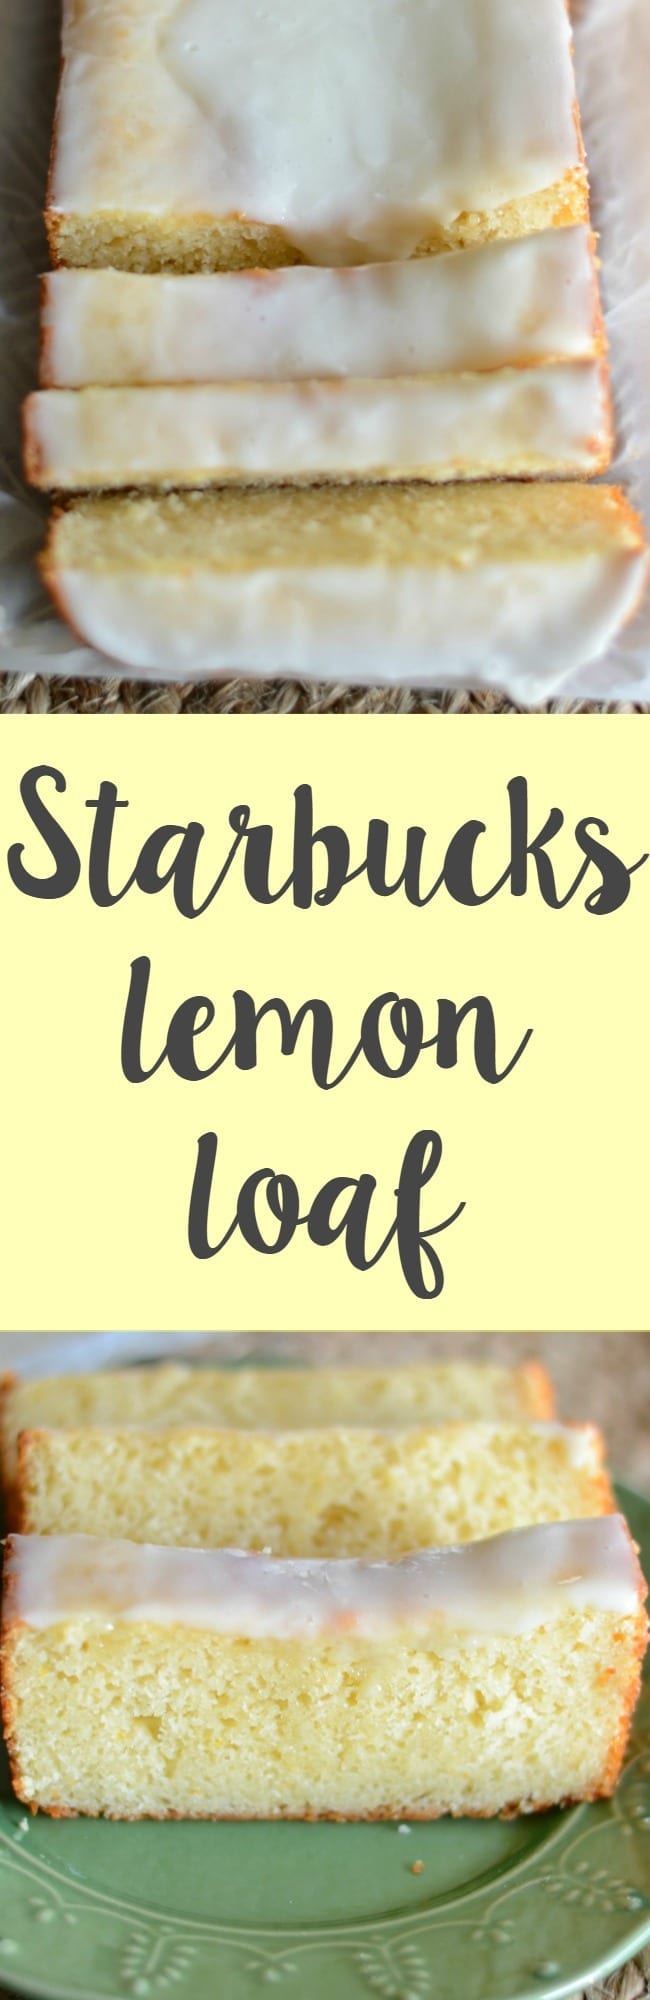 Make your own Starbucks lemon loaf at home!  Super easy recipe that you can enjoy any time!